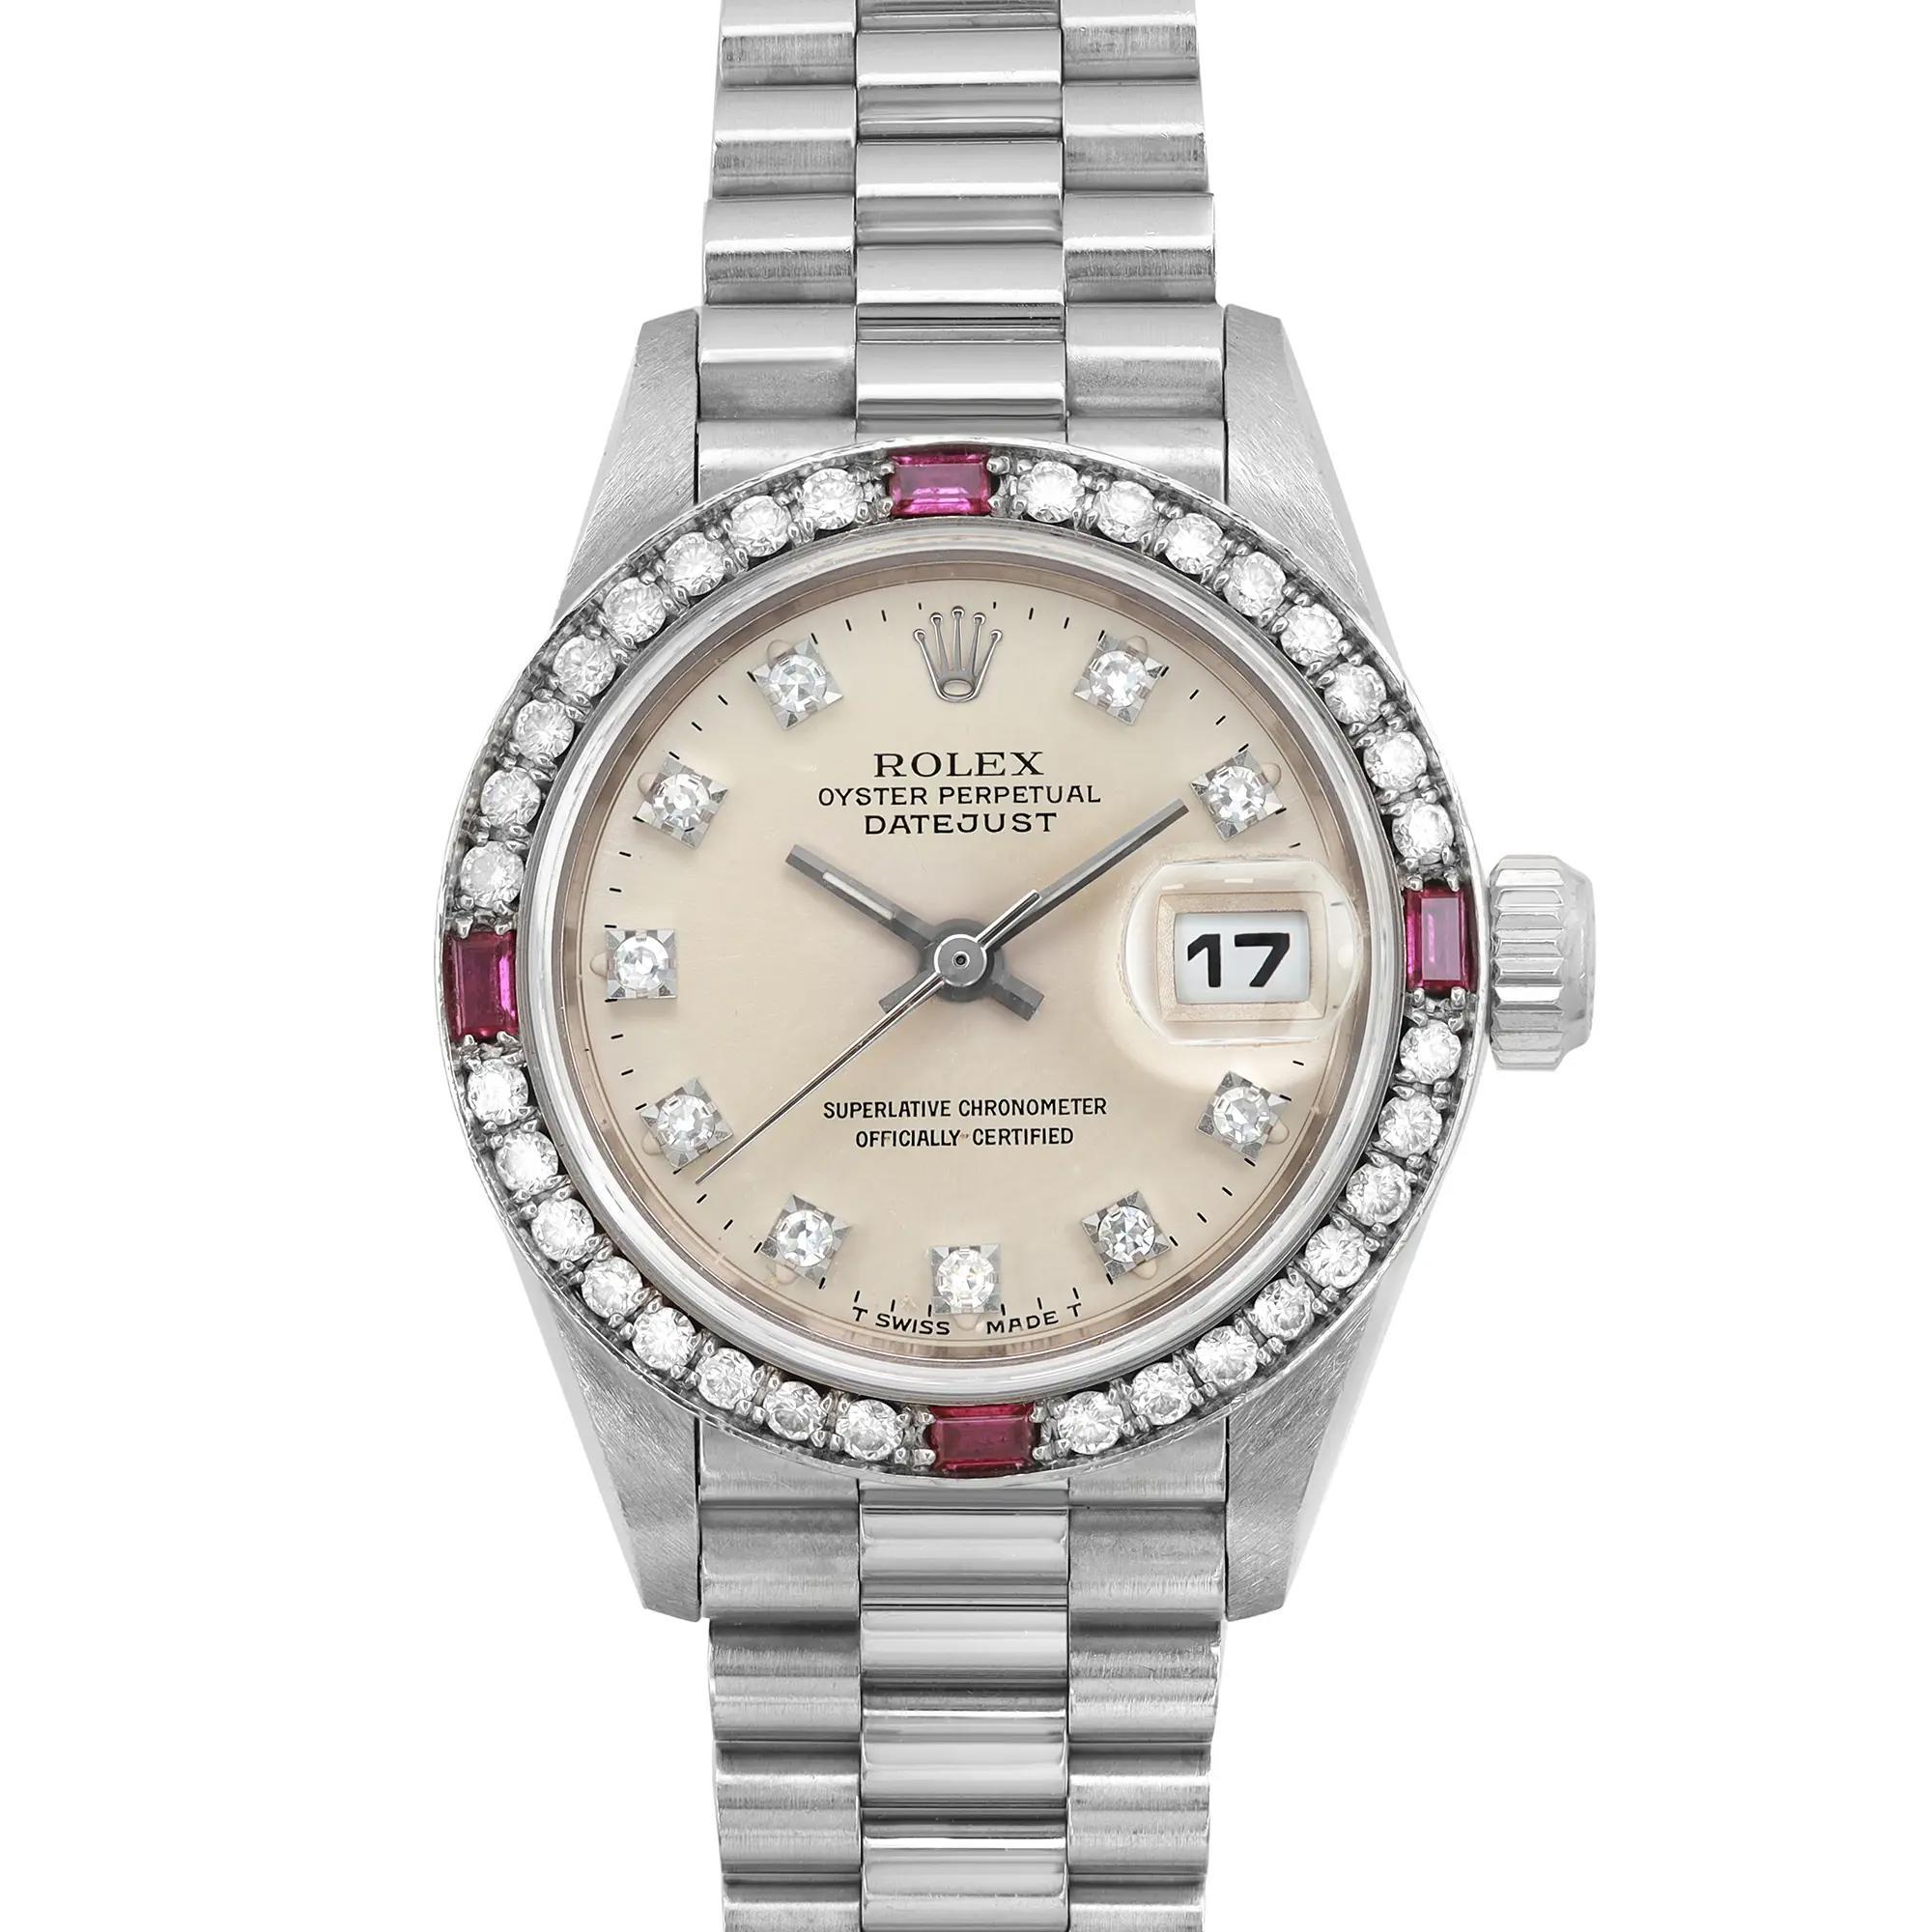 Pre-owned. Factory diamond bezel. This watch was produced in 1993. 

* Free Shipping within the USA
* Two-year warranty coverage
* 14-day return policy with a full refund. Buyers can verify the watch's authenticity at any boutique or dealership